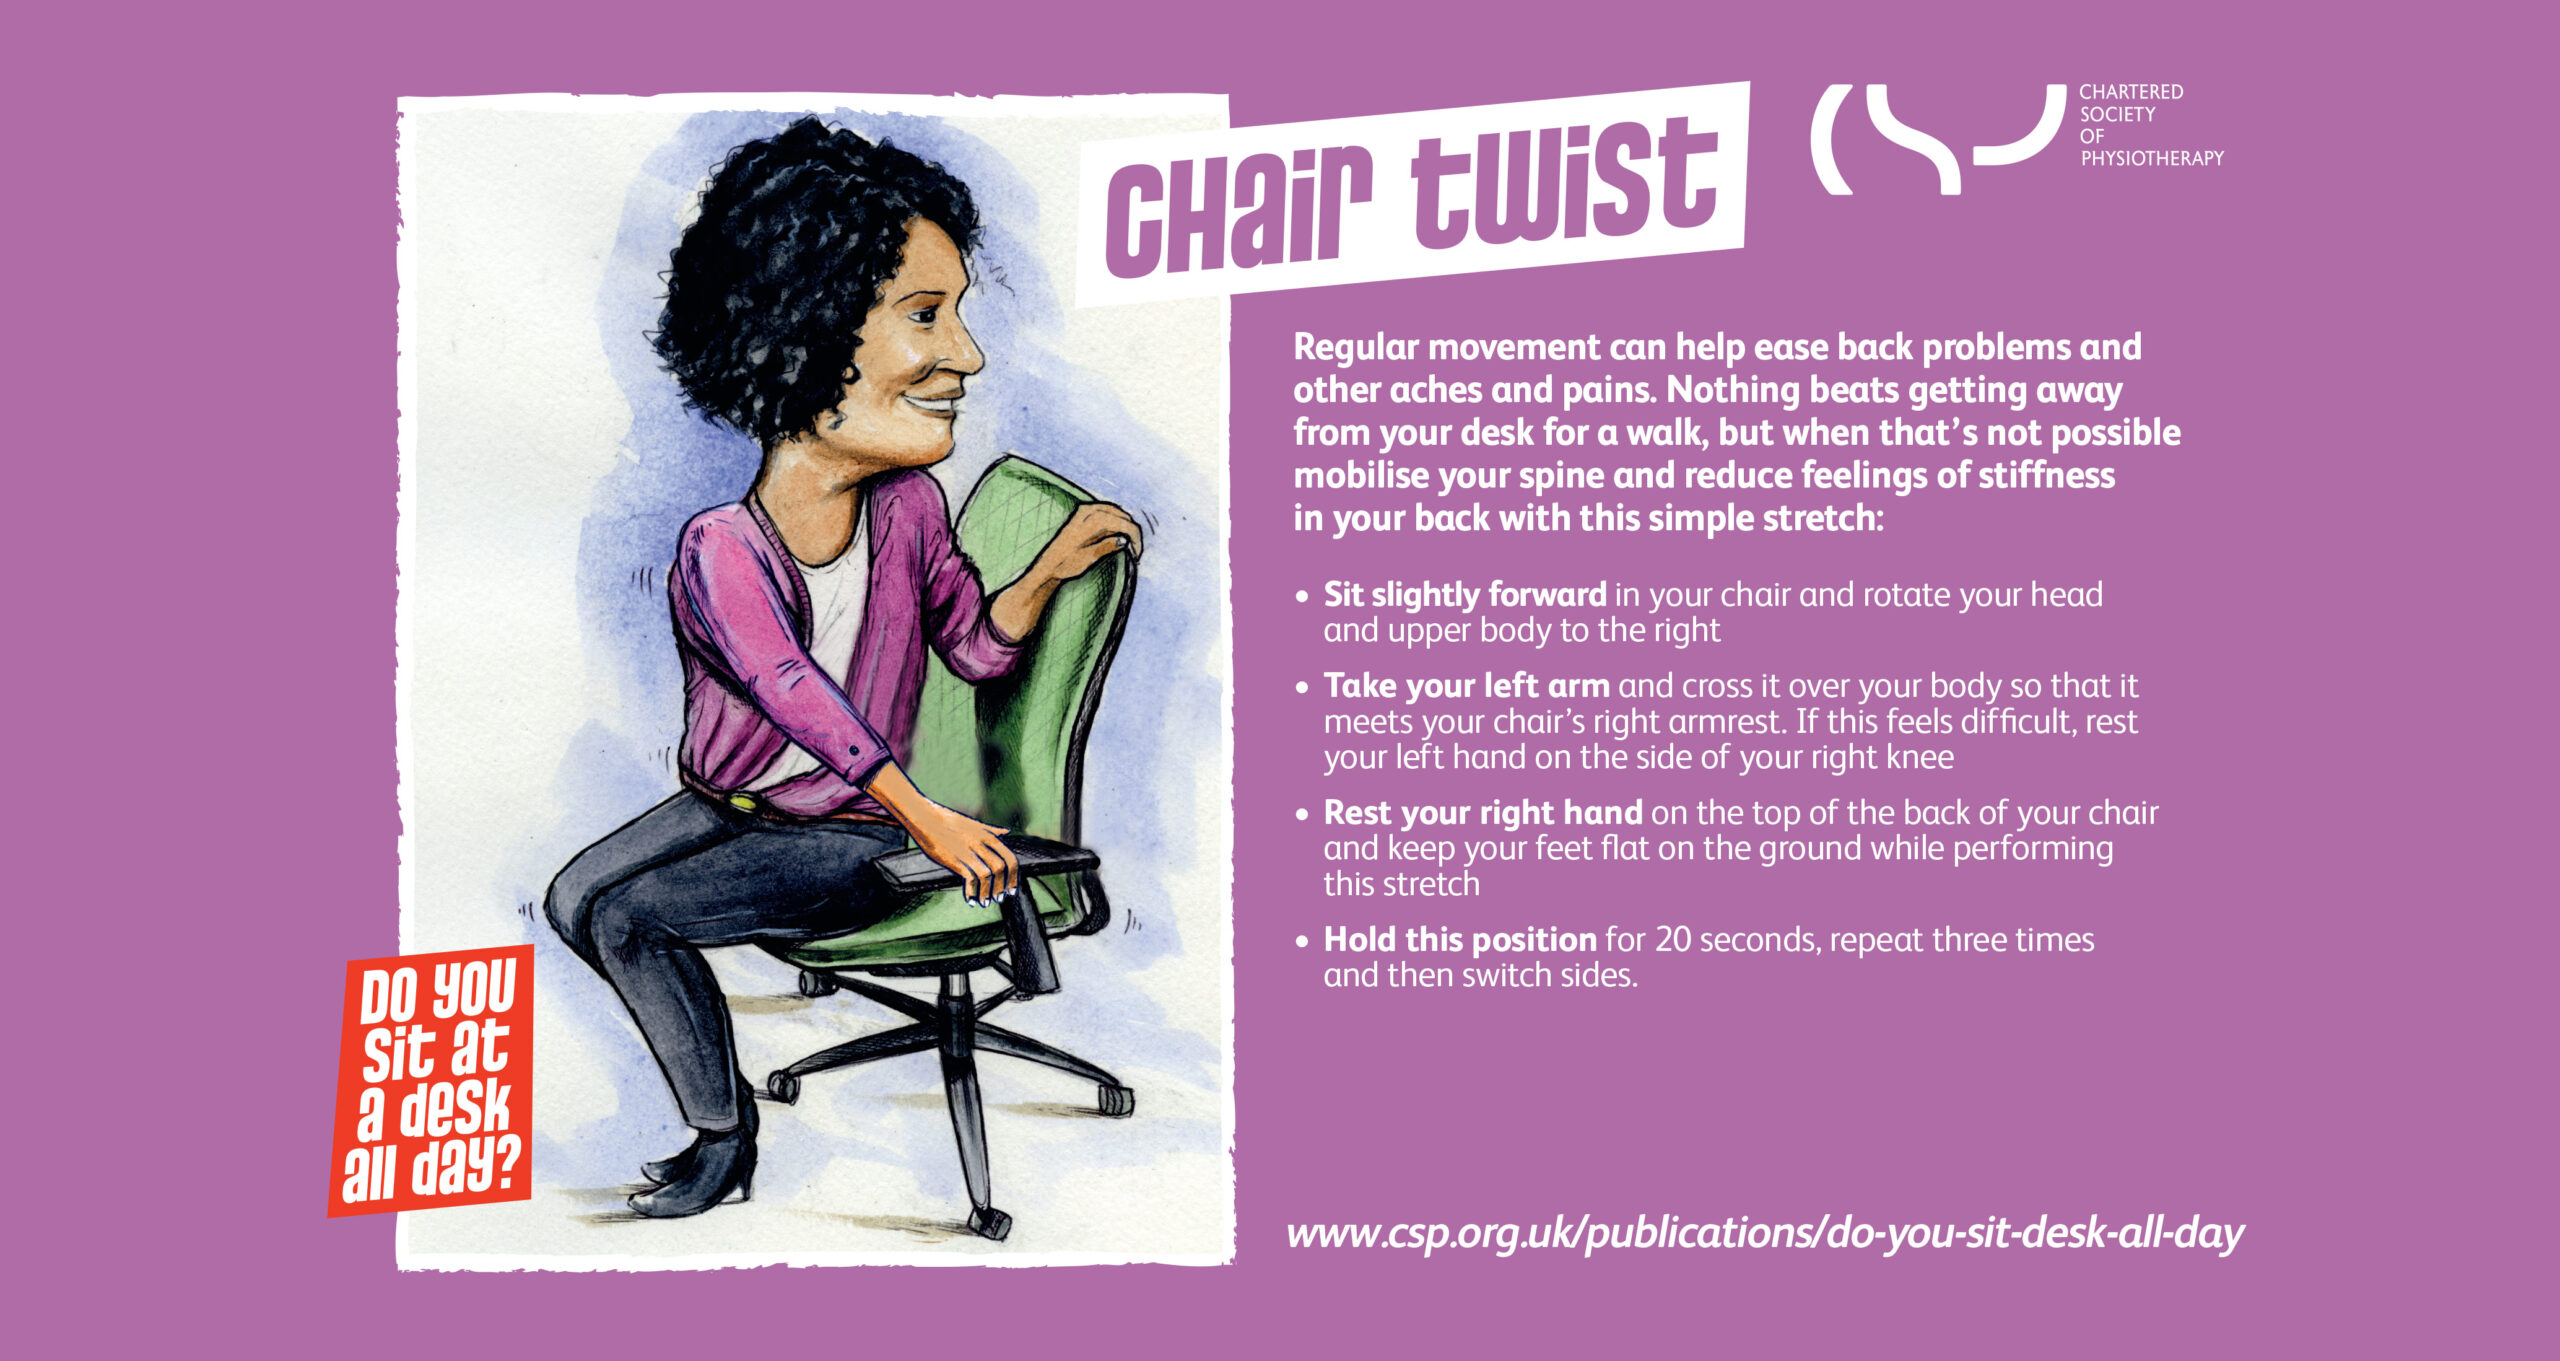 Chartered society of physiotherapy exercise card for the Chair Twist